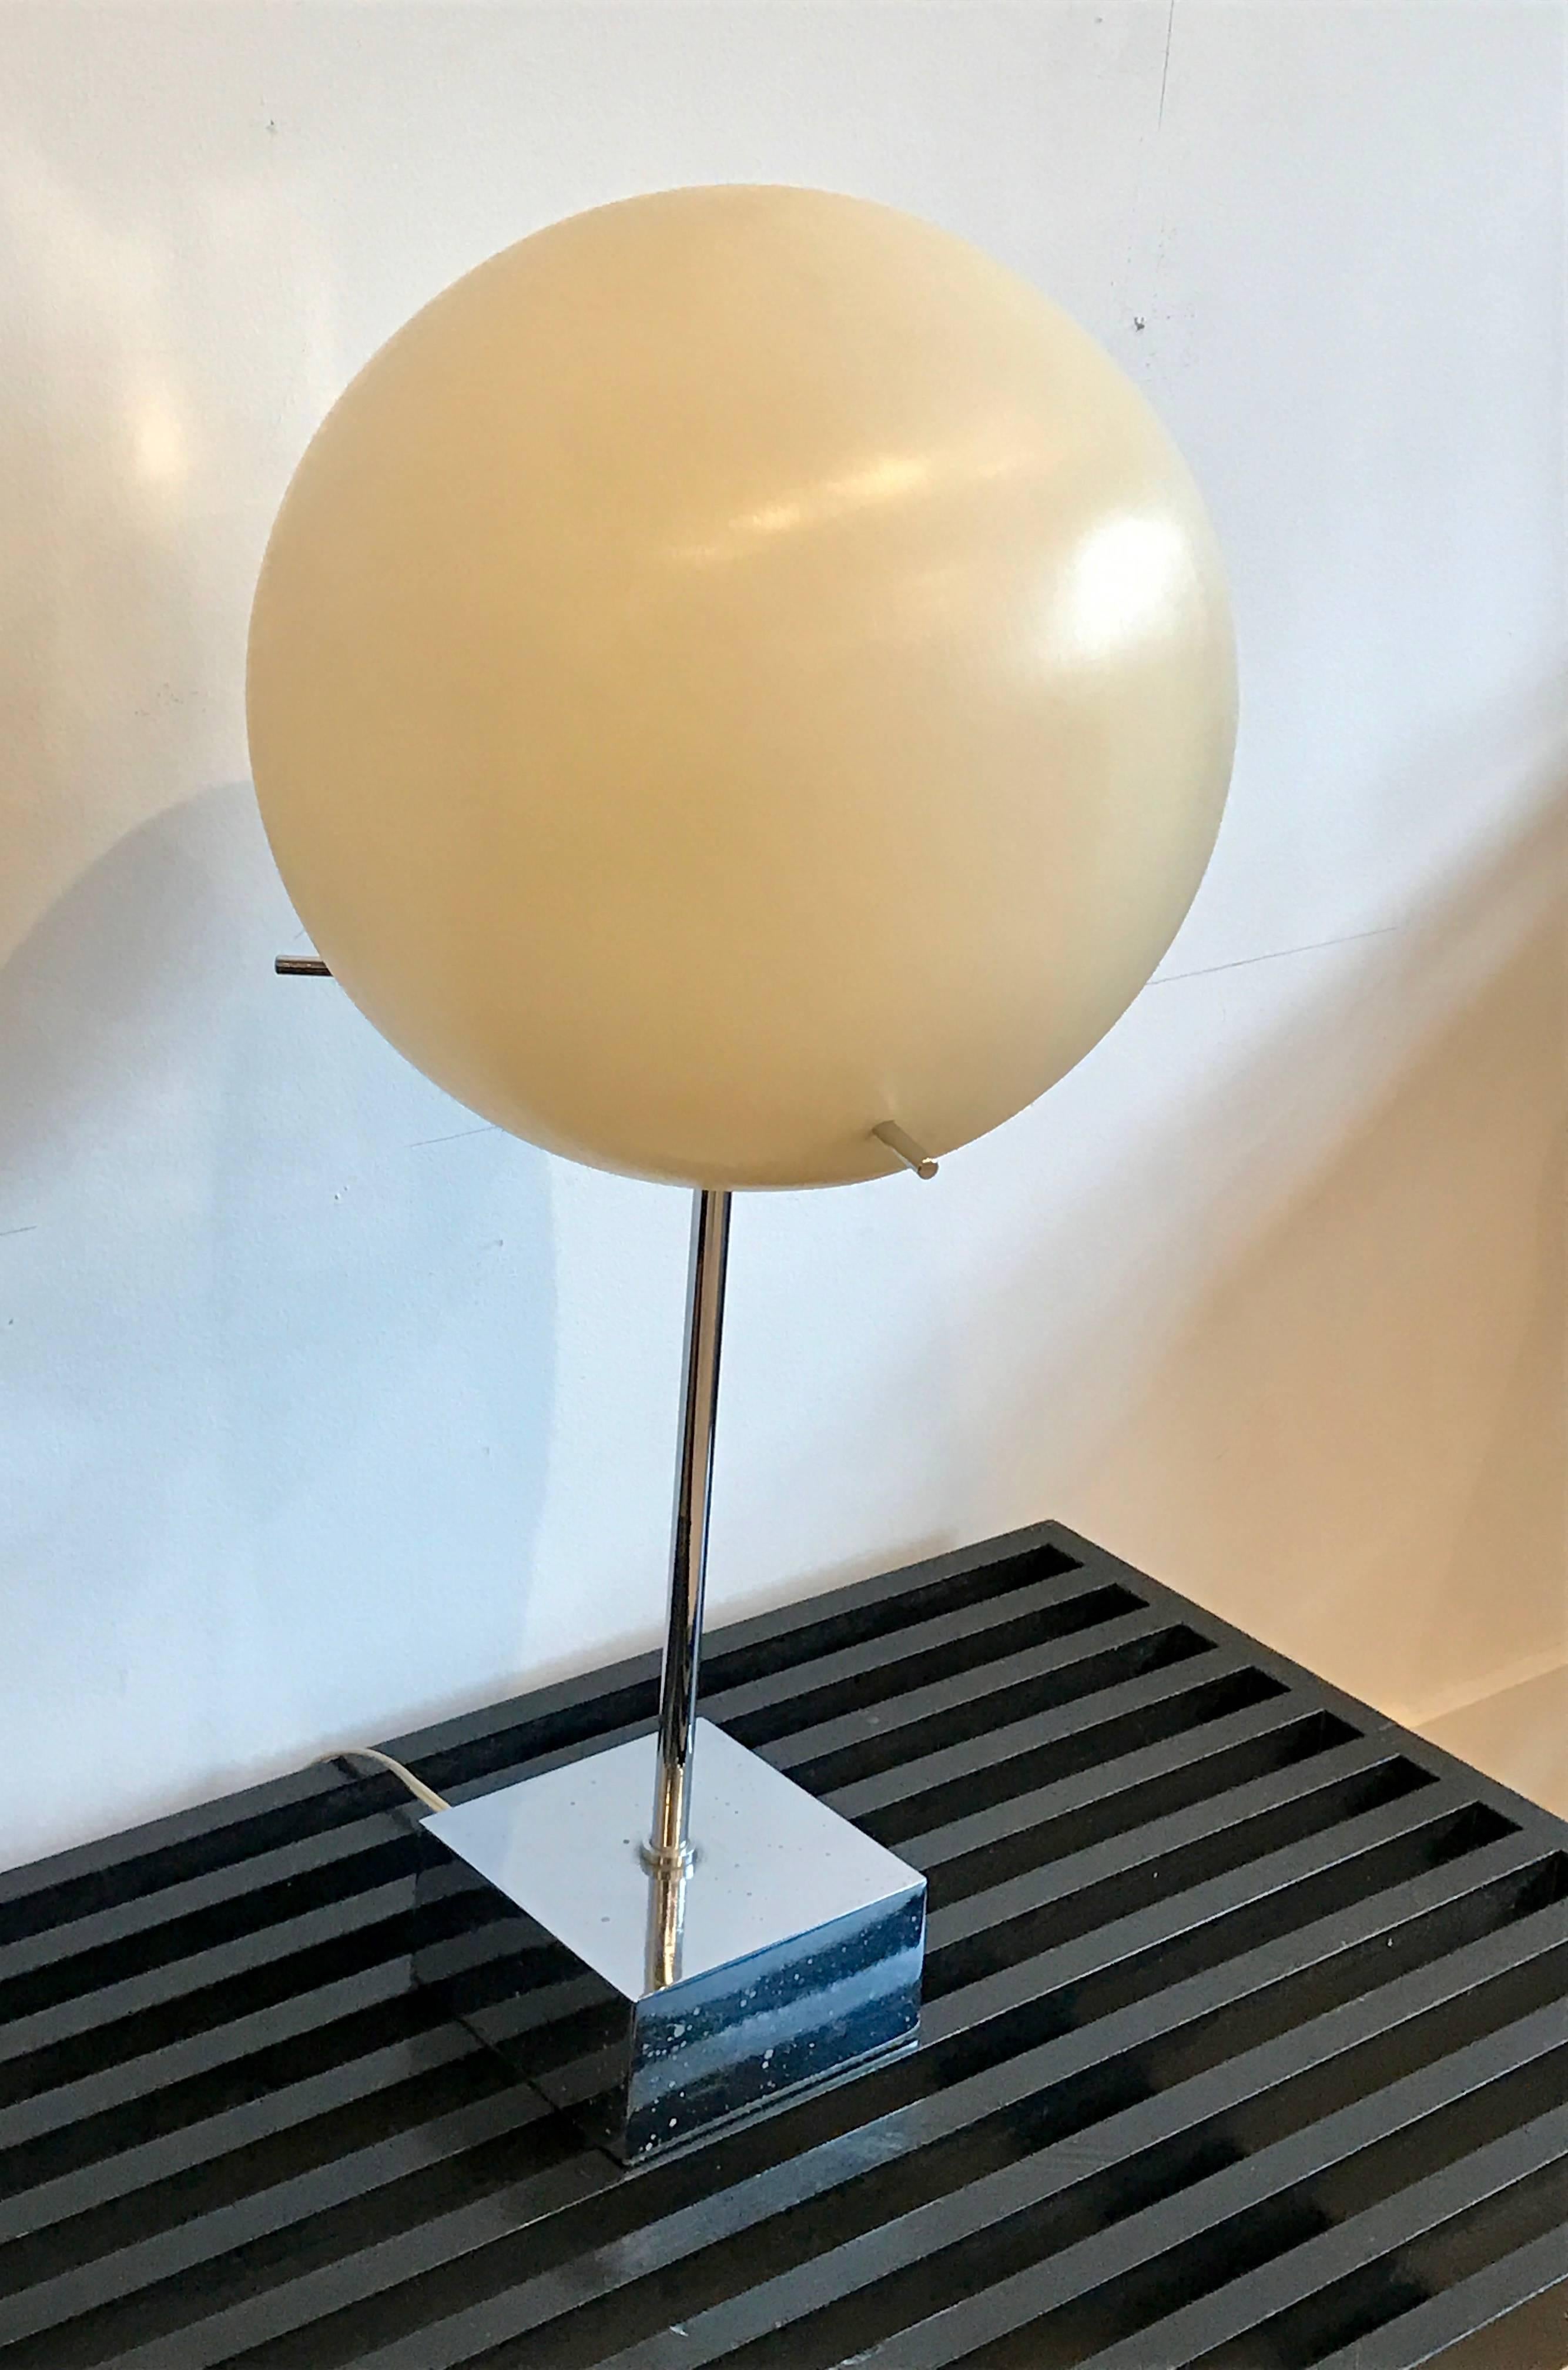 An ultra-modern chrome floor lamp with white globe shade by Paul Mayen for Habitat. Minimalist mirror-finish base and stem support an oversized balloon like plastic globe shade. A trio of chrome rods pierce the shade’s side, and serve as handles